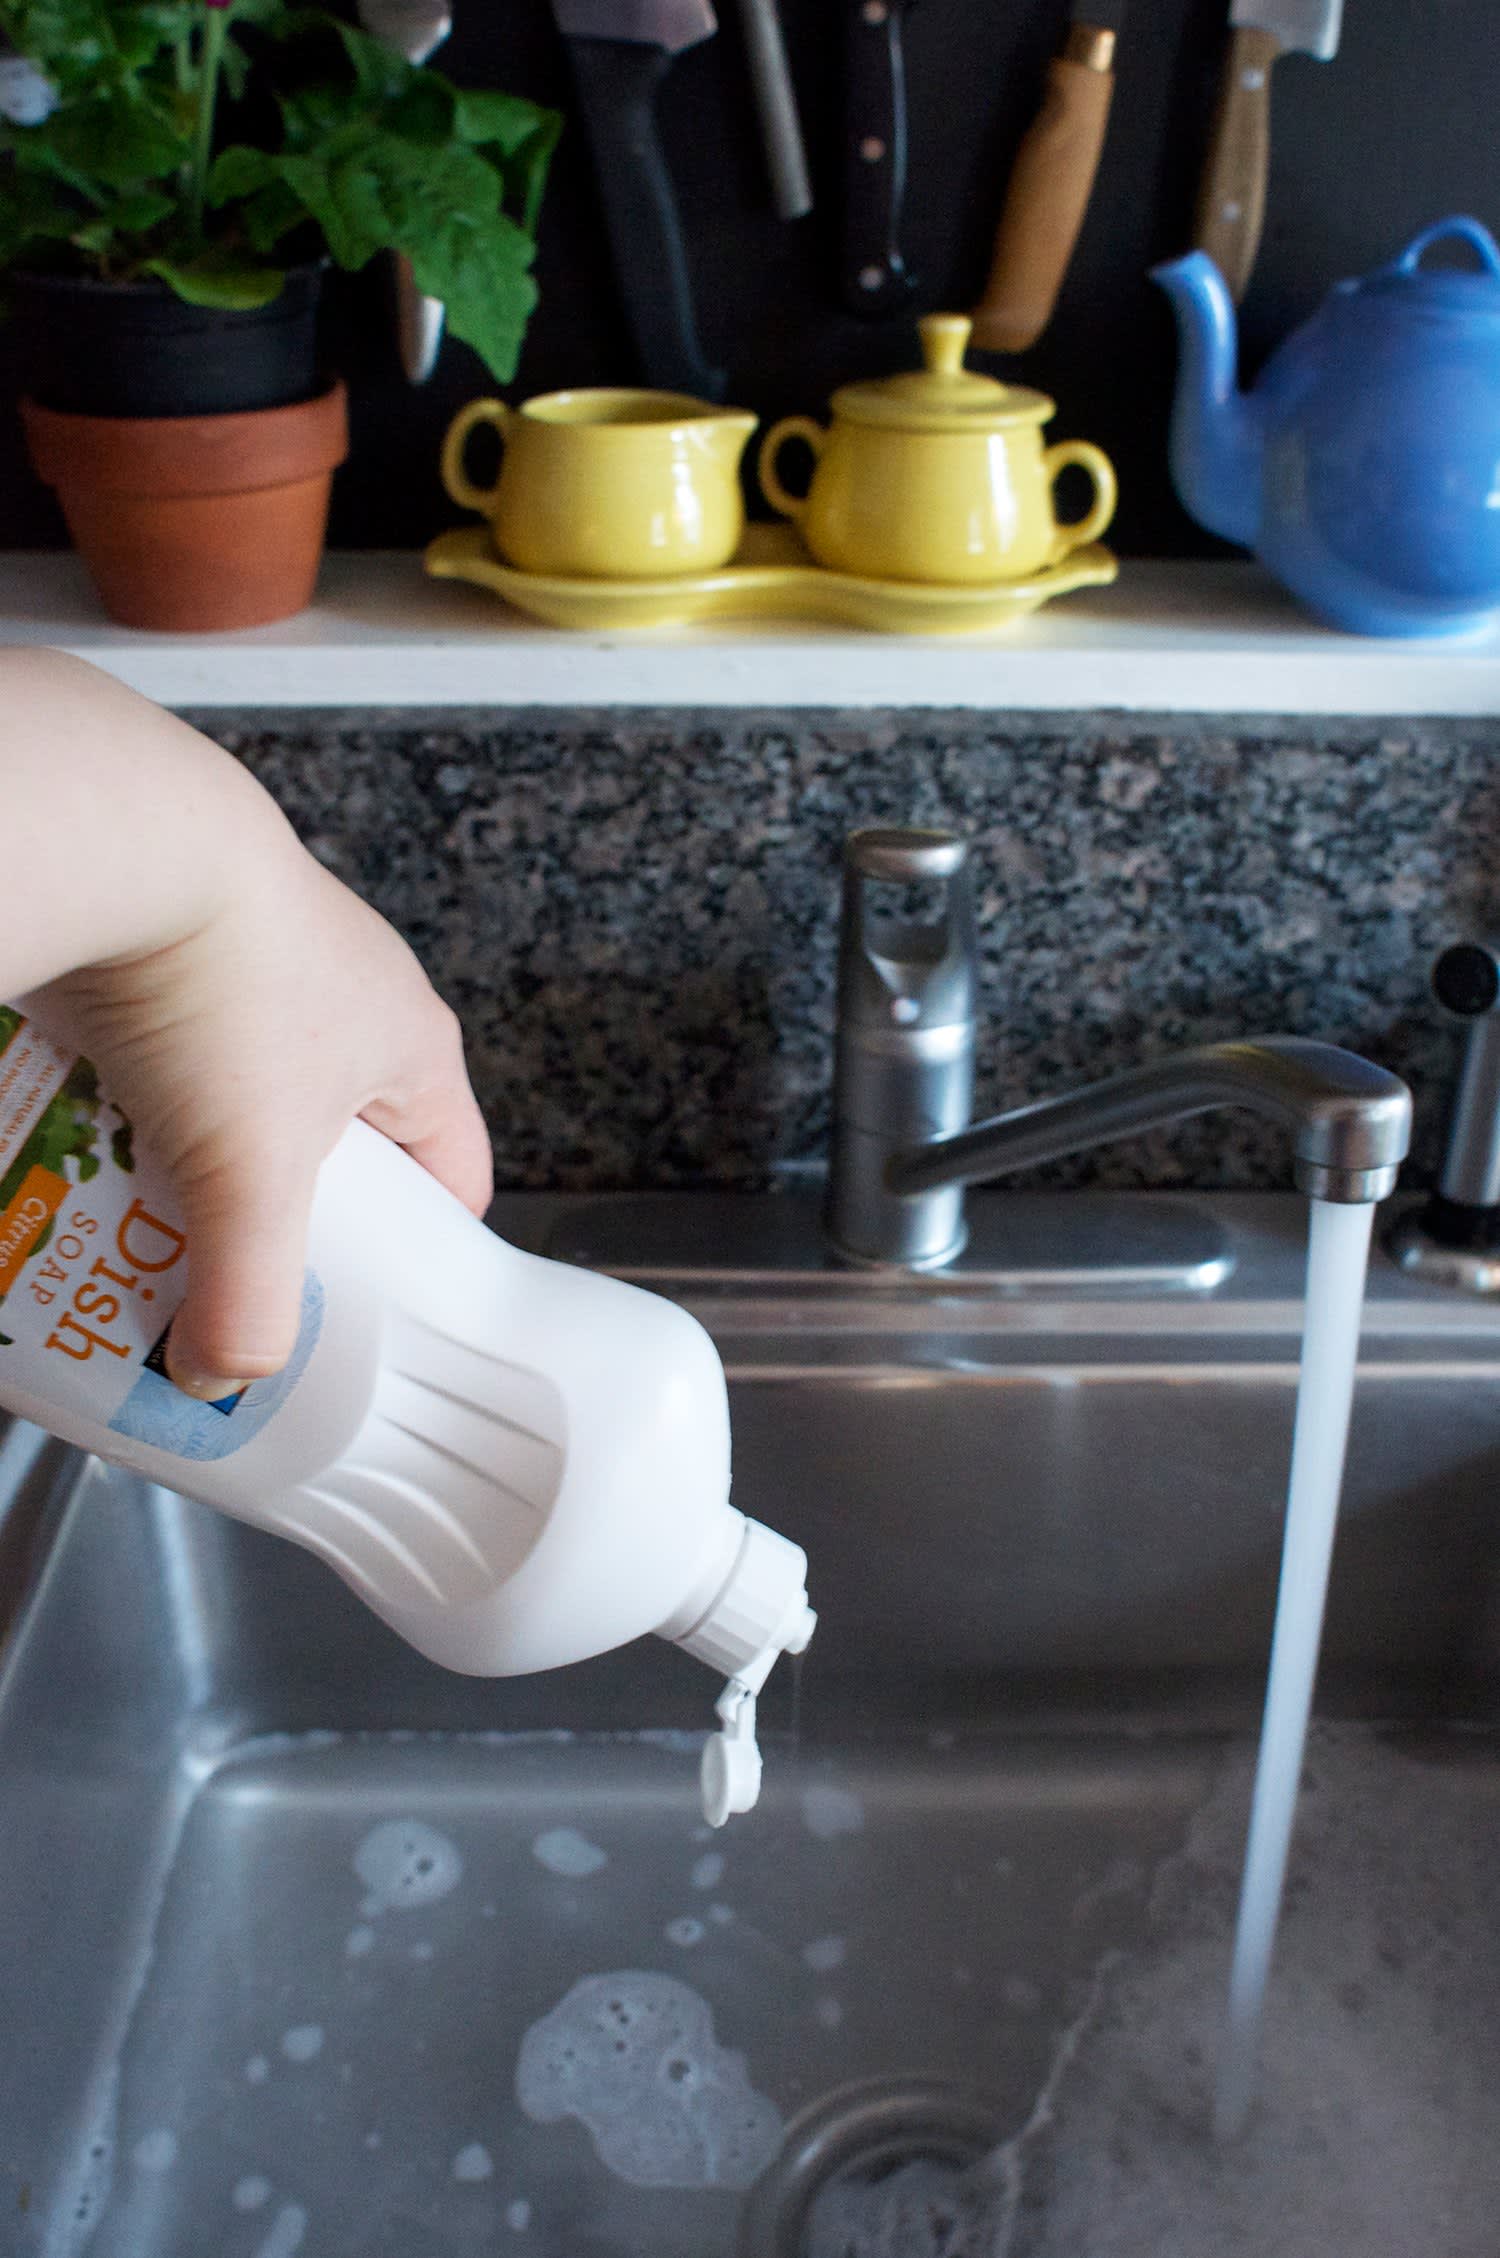 How To Squirt Dish Soap Into The Sink Kitchn 6223